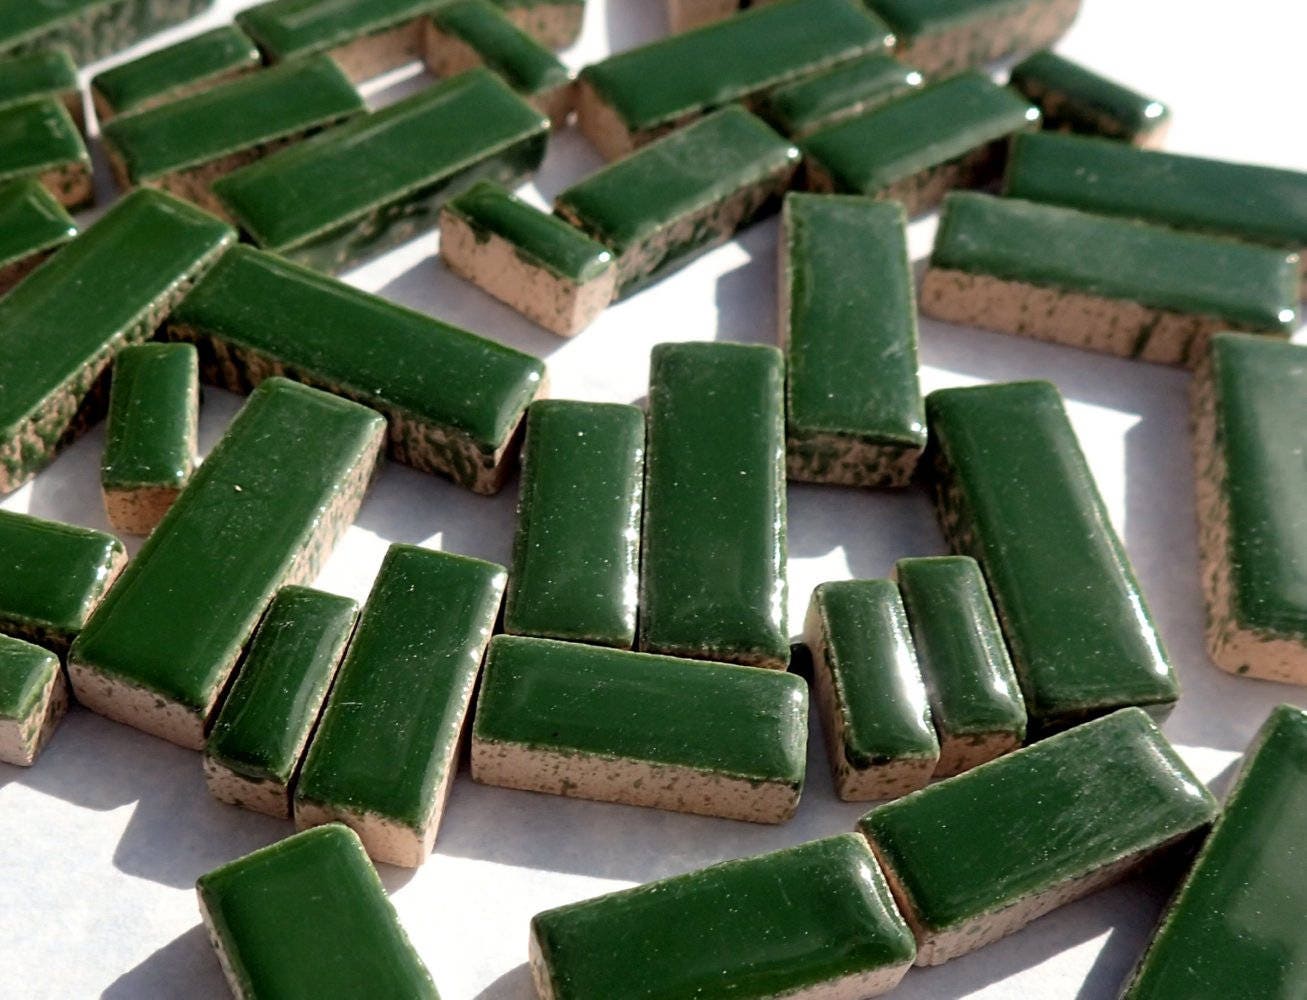 Deep Green Mini Rectangles Mosaic Tiles - 50g Ceramic in Mix of 3 Sizes 1/2" and 3/4" in Pesto